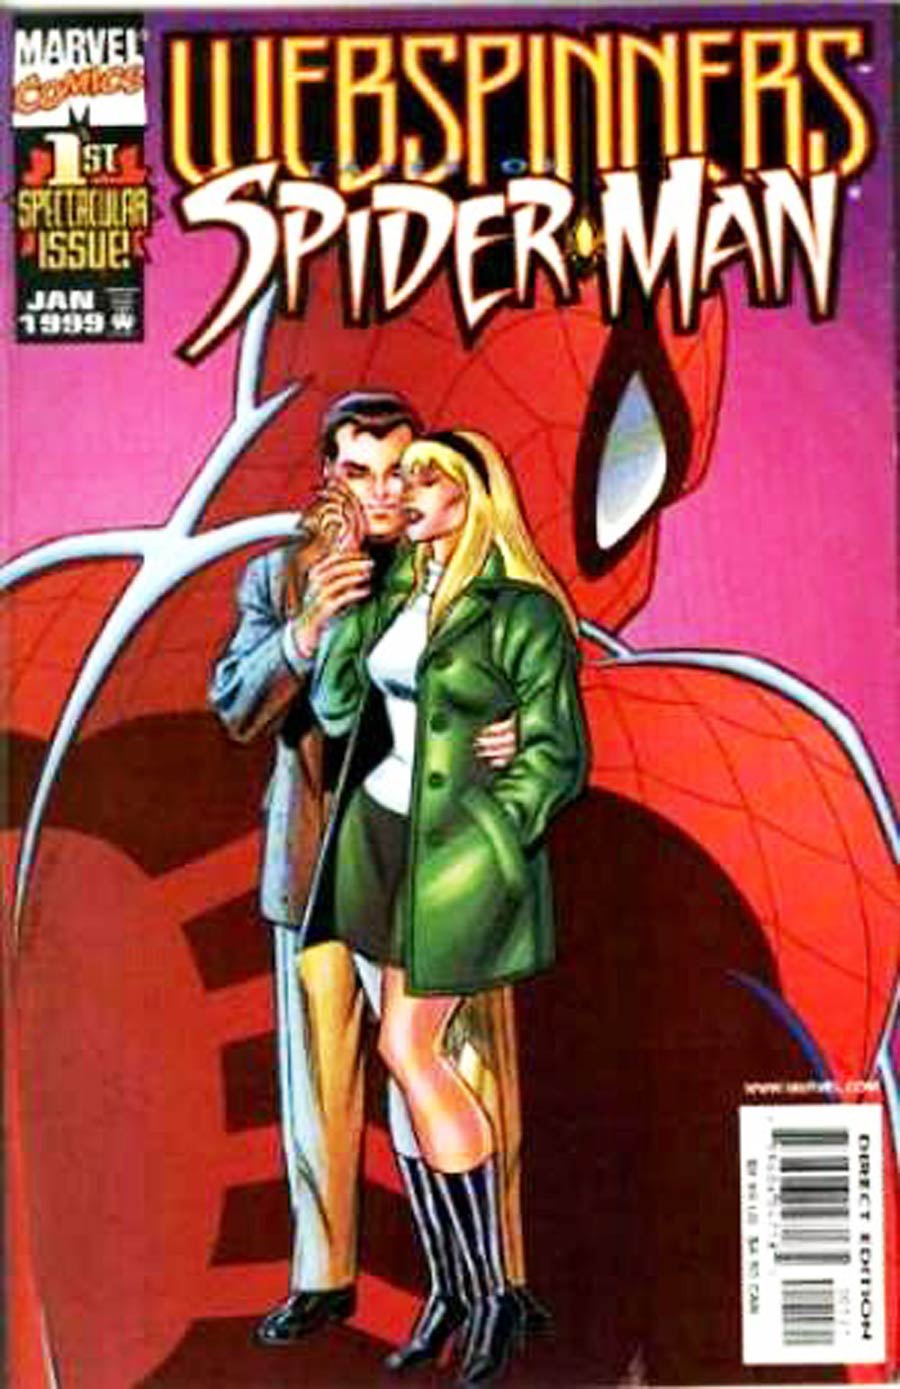 Webspinners Tales Of Spider-Man #1 Cover B